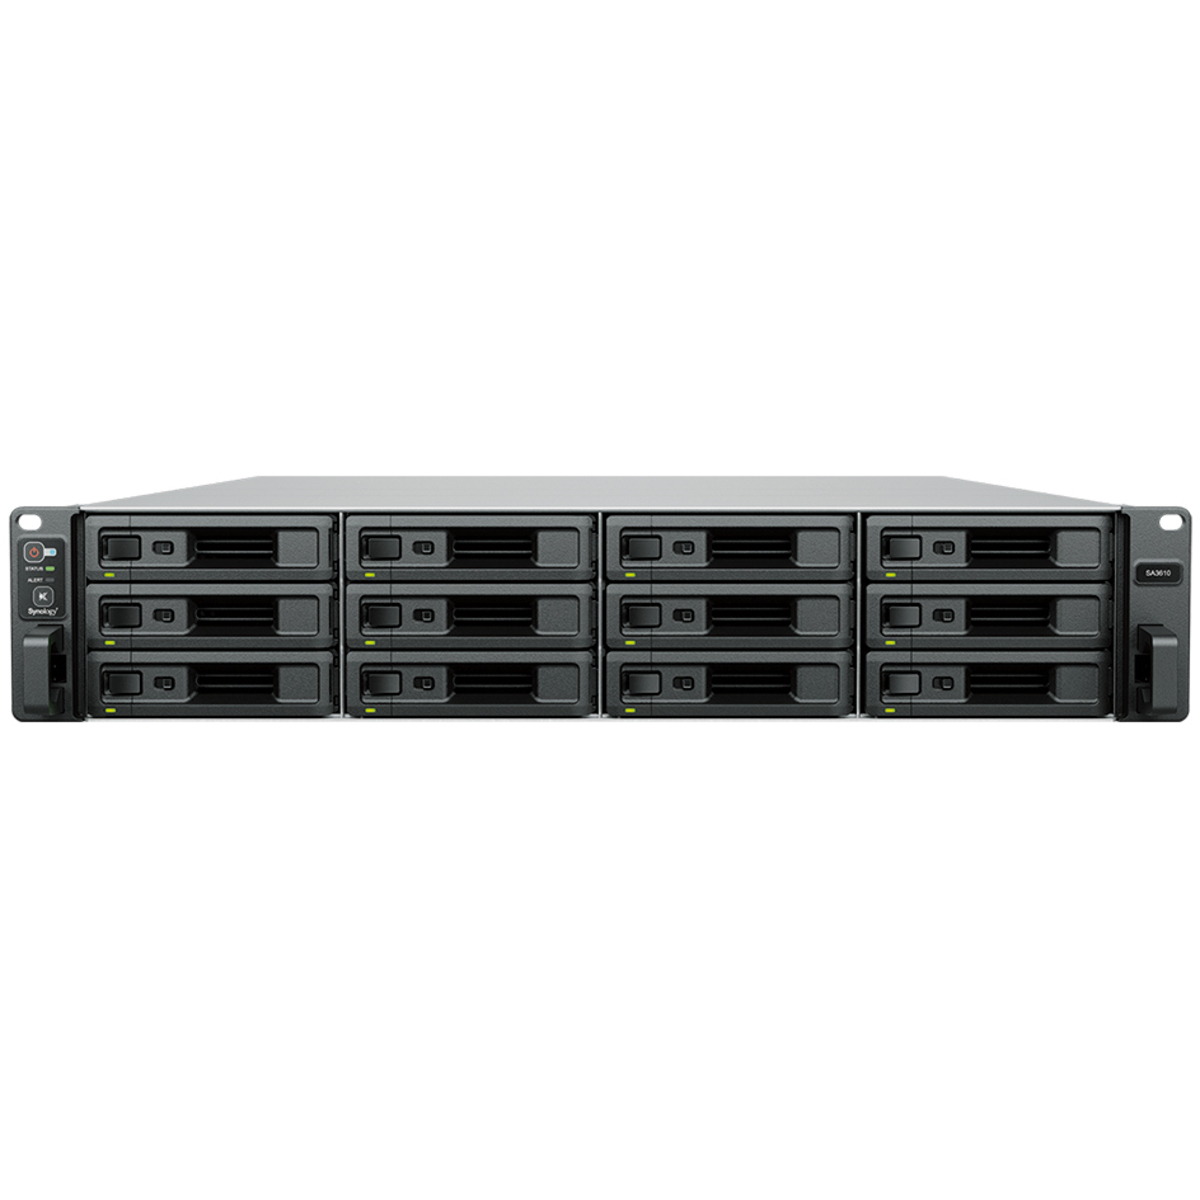 Synology RackStation SA3410 7.6tb 12-Bay RackMount Large Business / Enterprise NAS - Network Attached Storage Device 8x960gb Synology SAT5210 Series SAT5210-960G 2.5 530/500MB/s SATA 6Gb/s SSD ENTERPRISE Class Drives Installed - Burn-In Tested RackStation SA3410